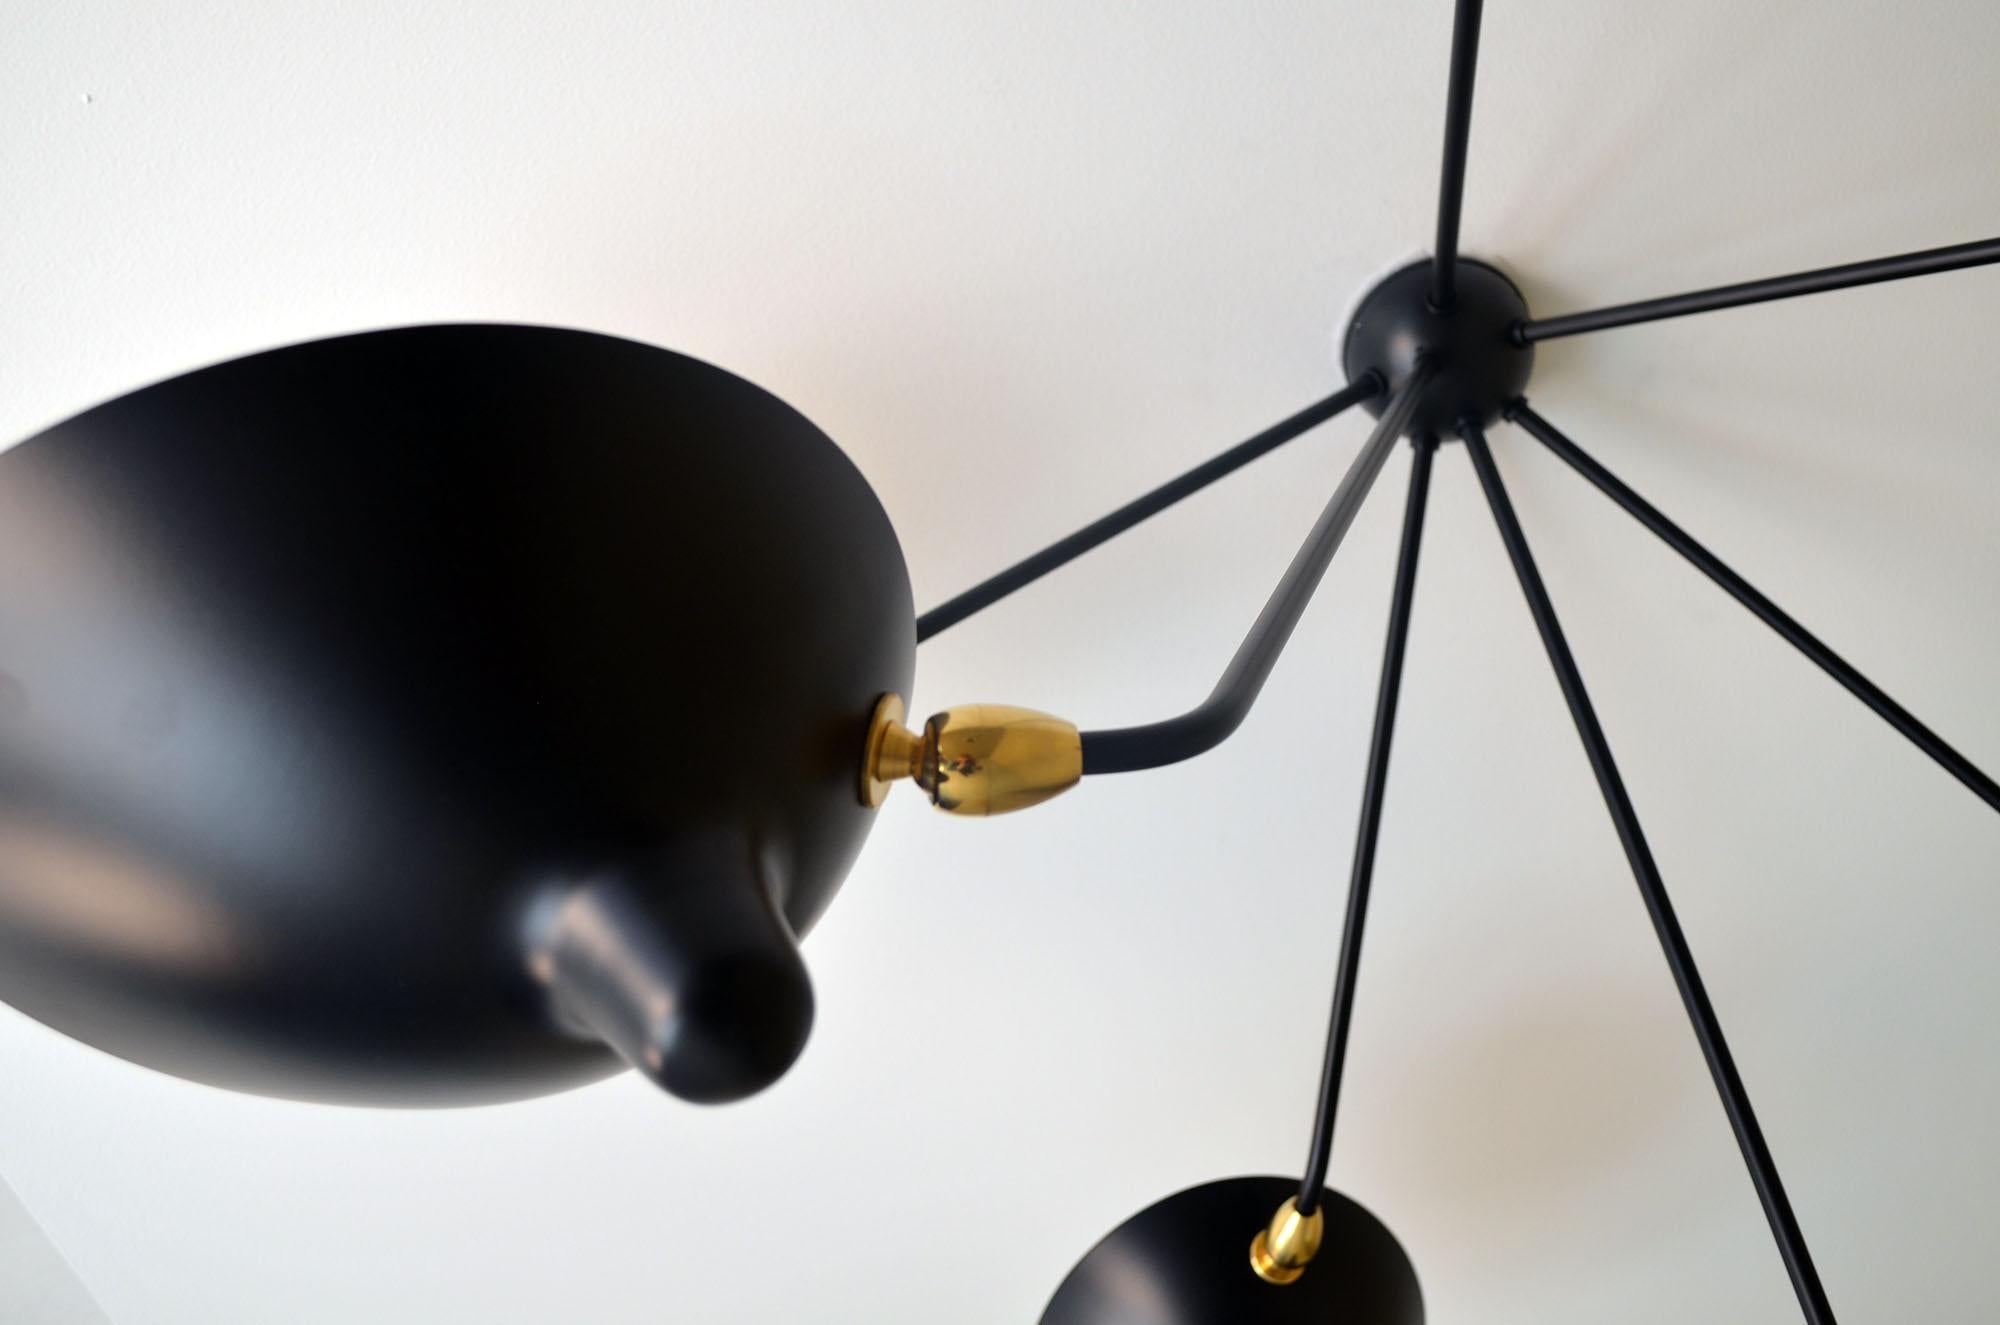 Painted Serge Mouille - Spider Ceiling Lamp with 5 Arms in Black or White For Sale